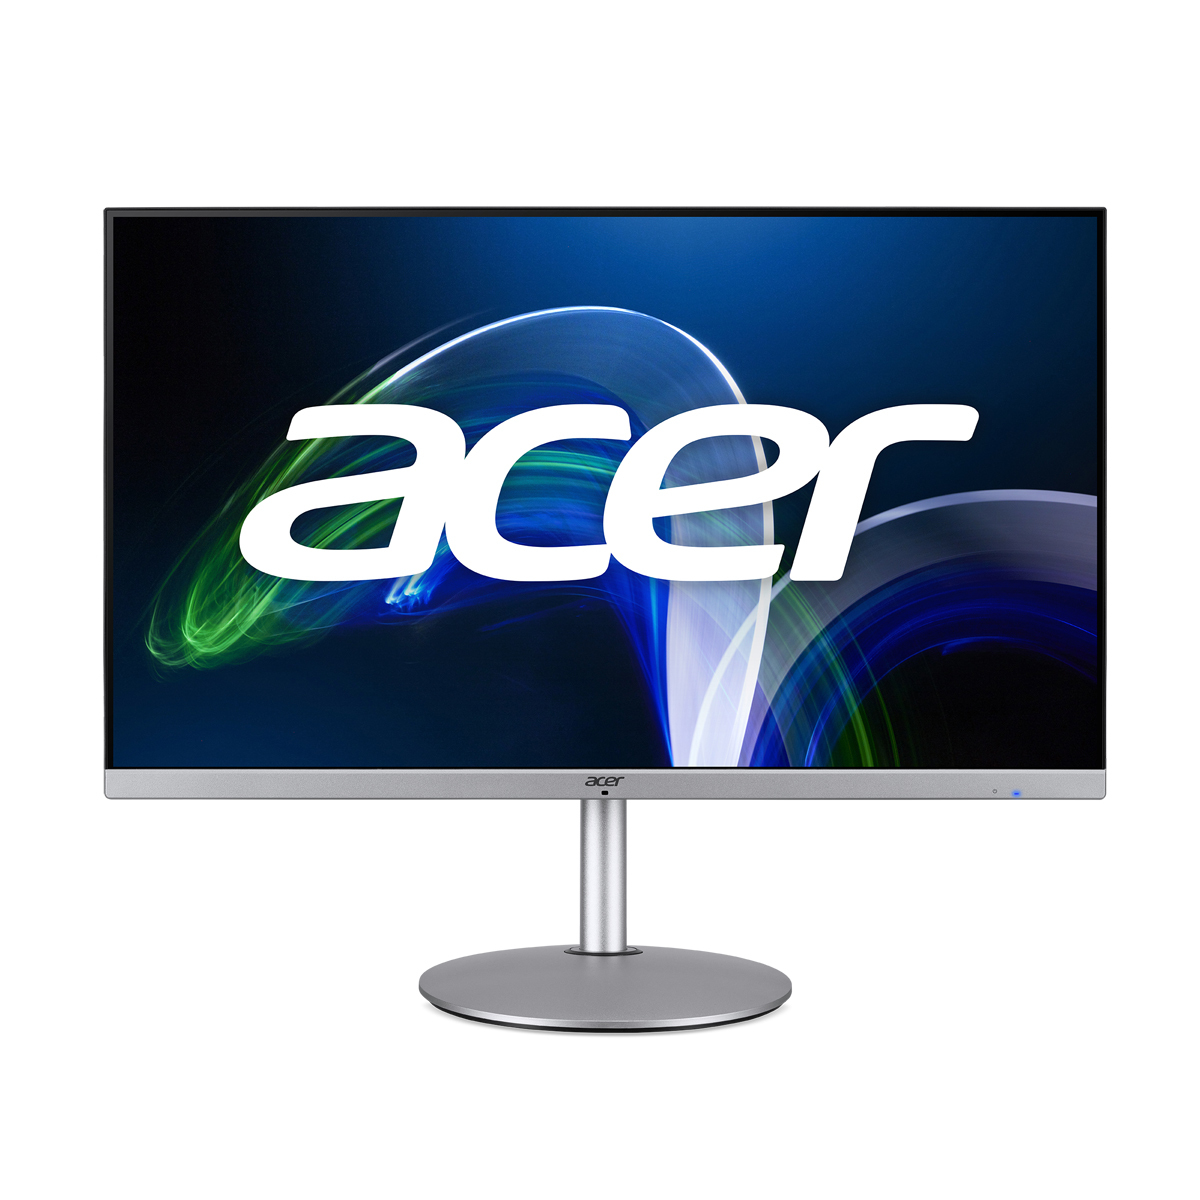 Acer CB2 (CB322QKsemipruzx) 31,5" UHD Business Monitor 80cm (31,5"), 350 Nits, HDMI, DP, USB, RJ45, Audio In/Out von Acer